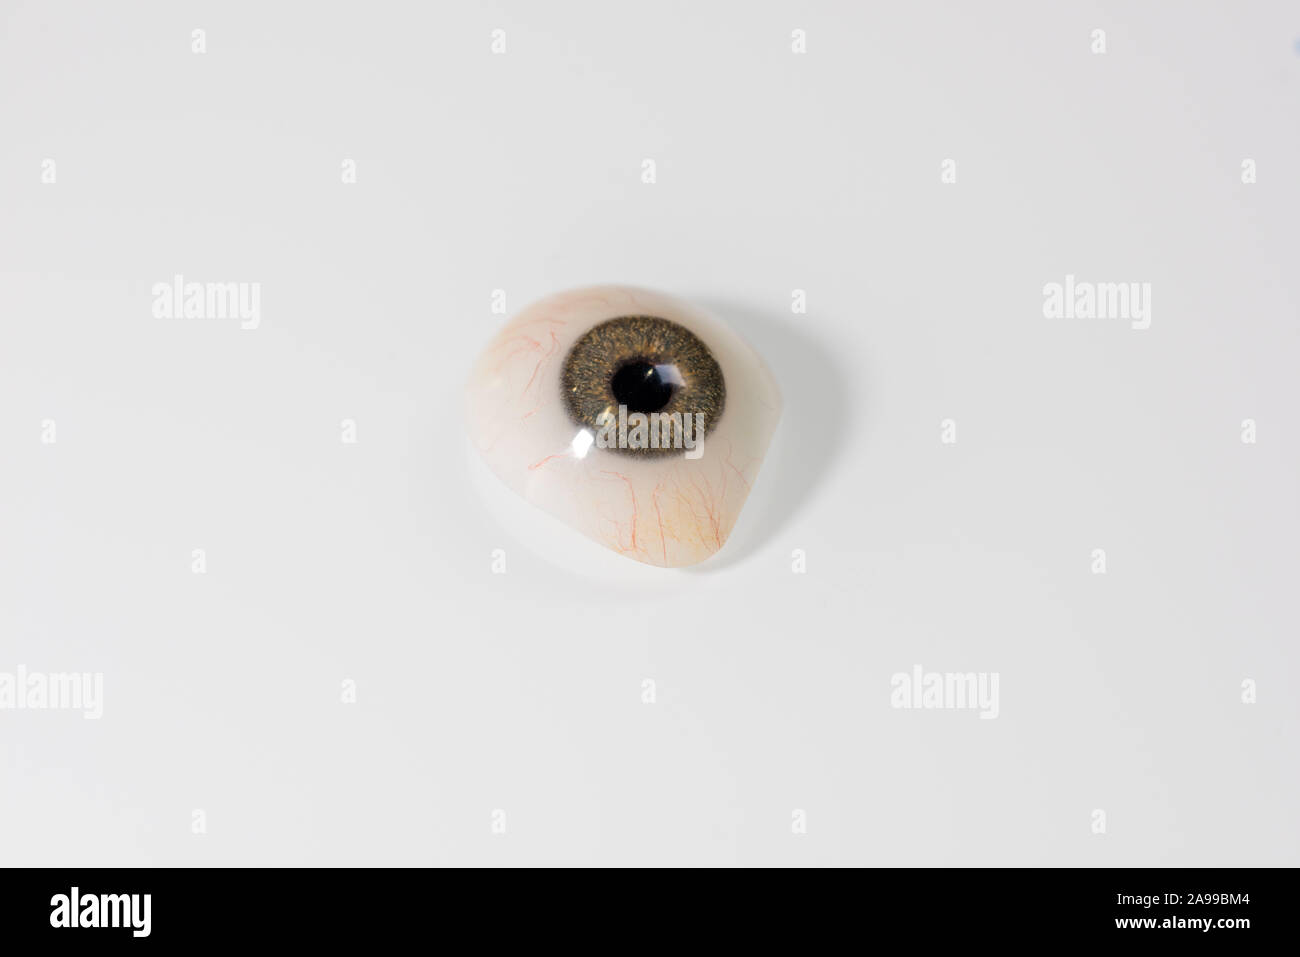 Glass eye prosthetic or Ocular prosthesis with shadow on white glass Stock Photo